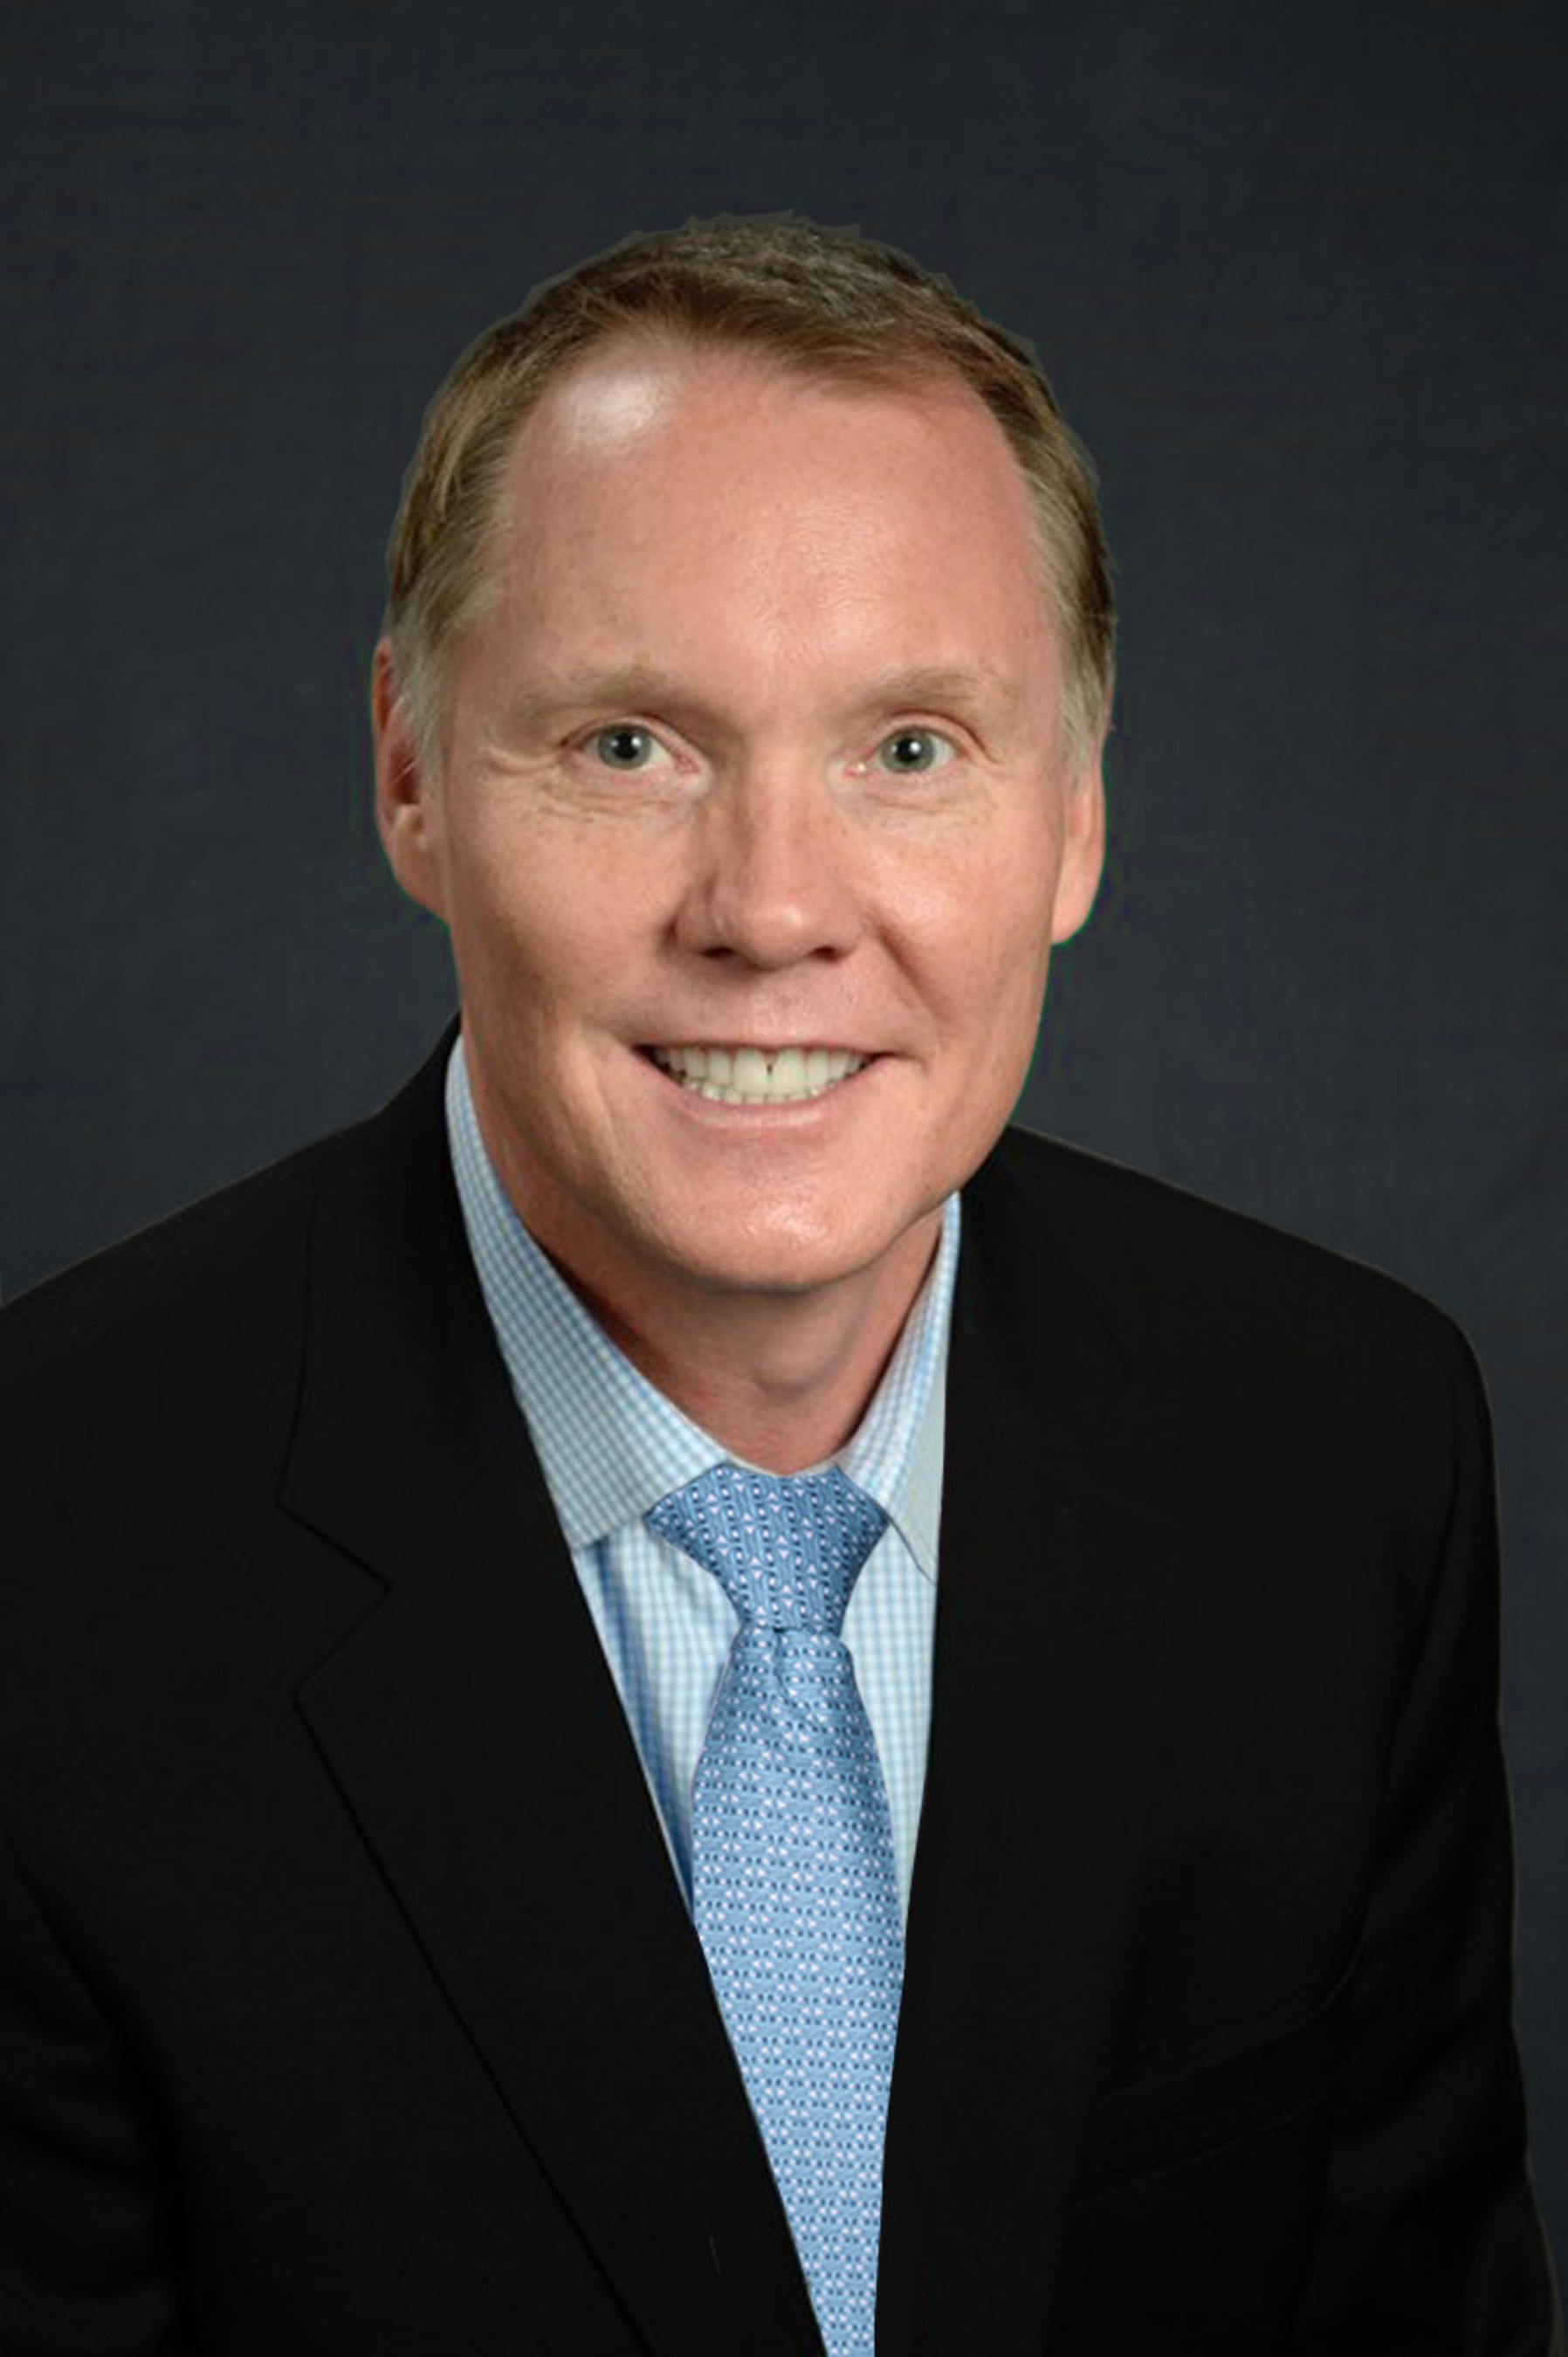 Steve Strom, a 30-year industry veteran, joins Blackhill Partners as CEO.